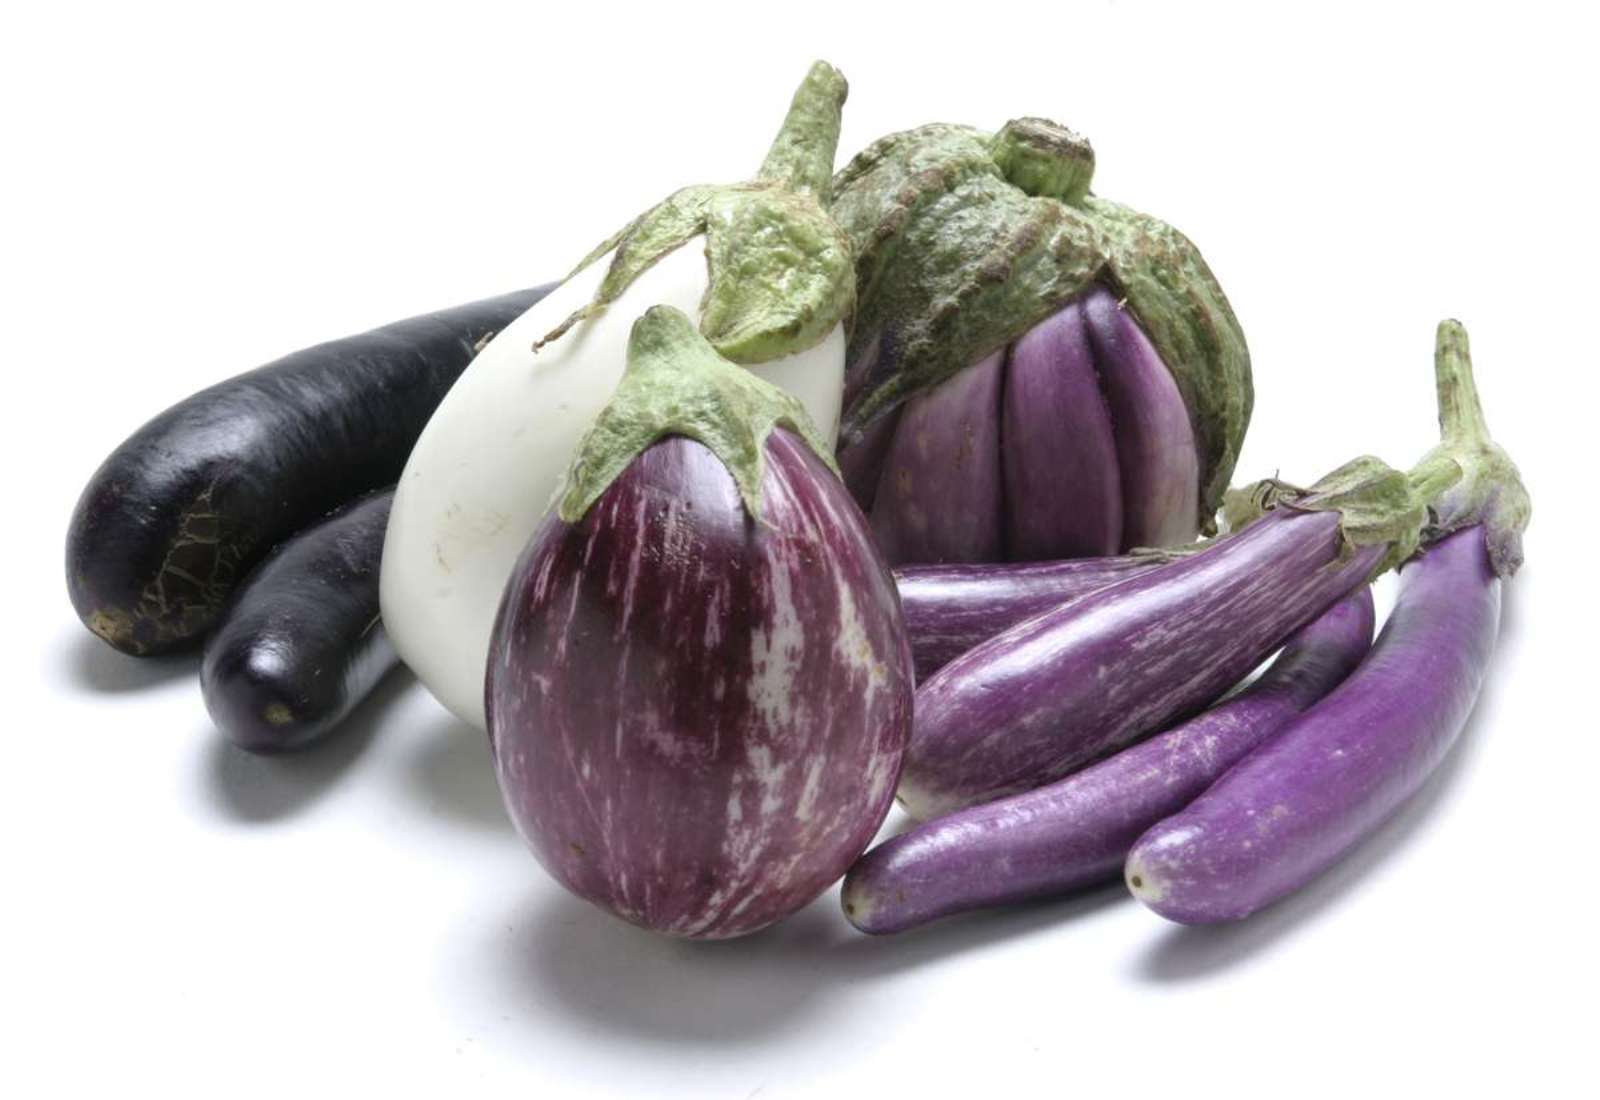 Farmers market report: Eggplant is in season (and we'll ...
